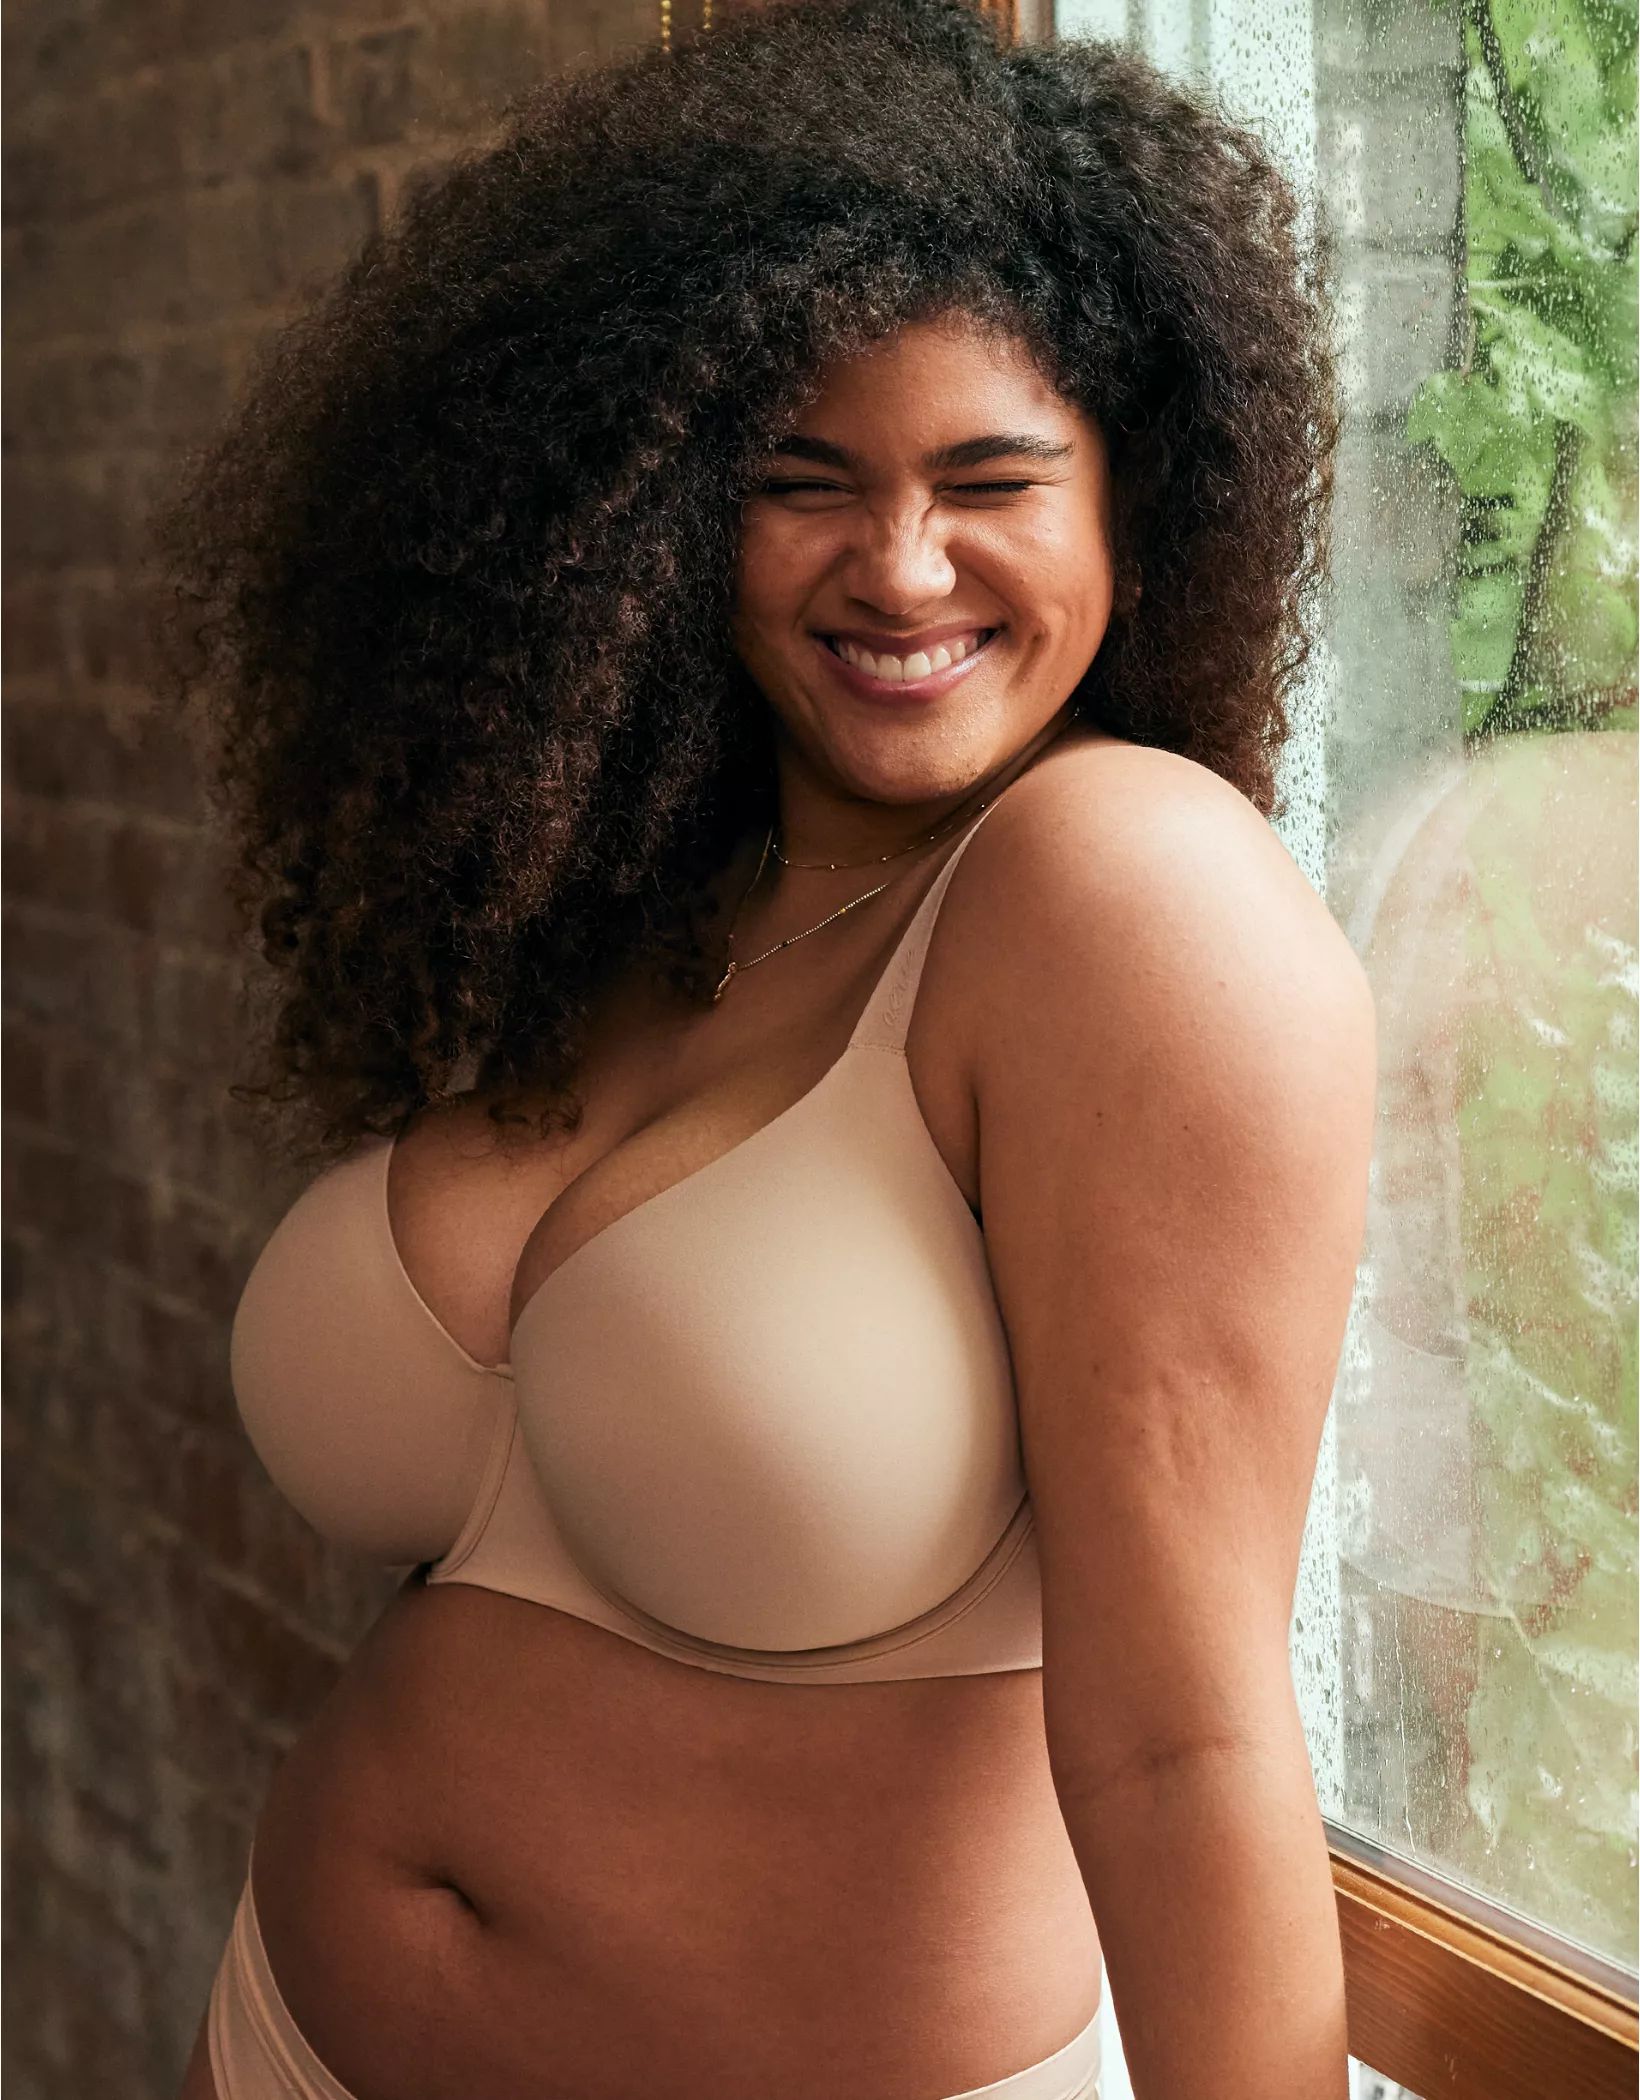 SMOOTHEZ Full Coverage Lightly Lined Bra | Aerie